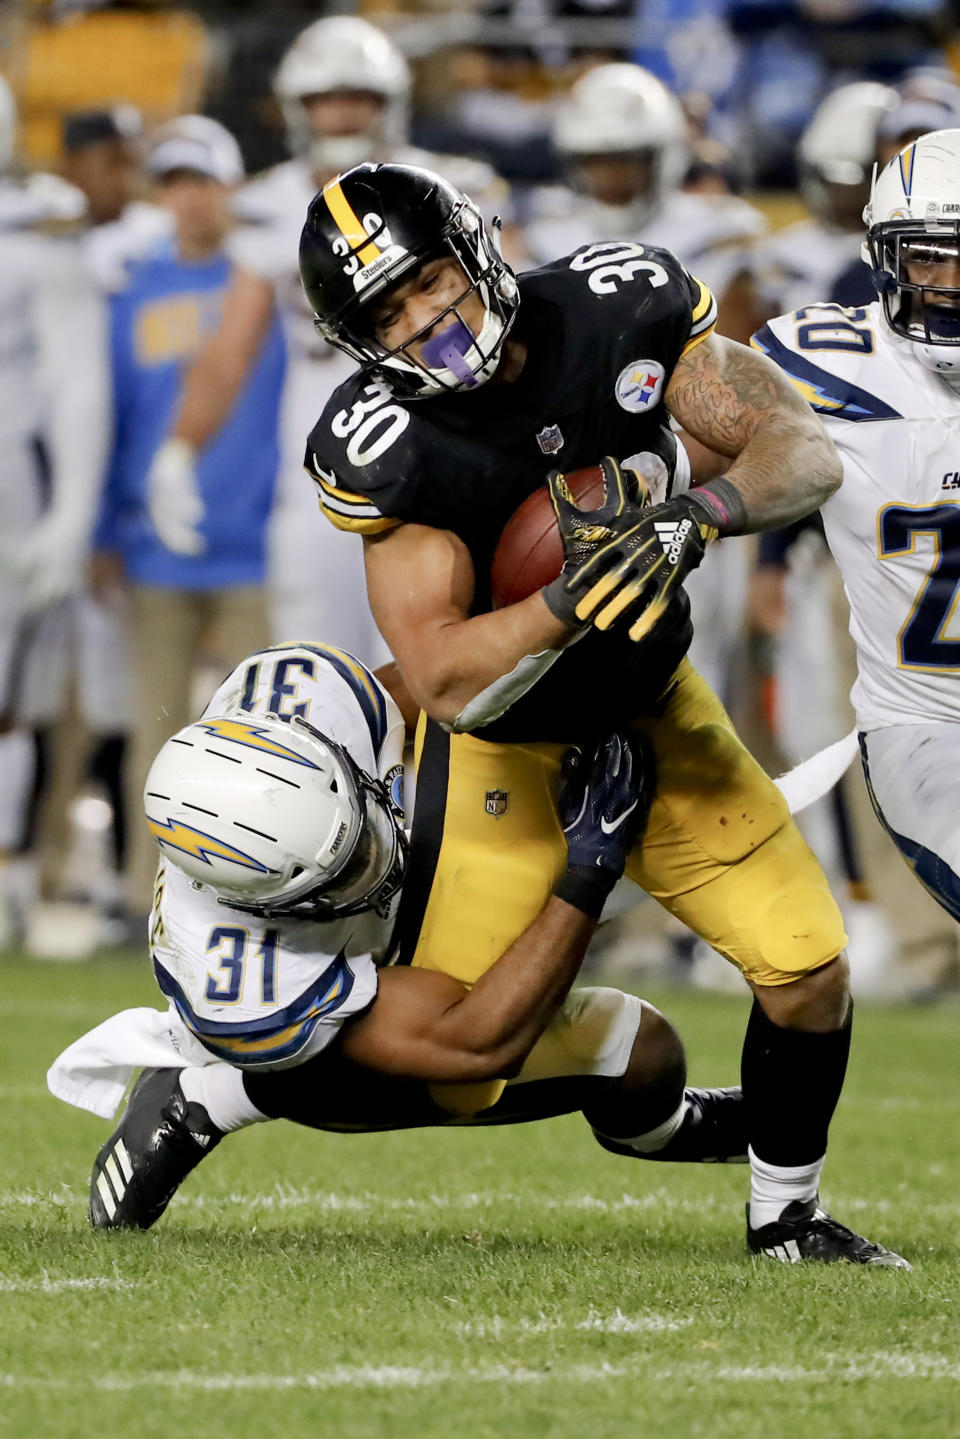 Pittsburgh Steelers running back James Conner (30) is injured as Los Angeles Chargers defensive back Adrian Phillips (31) tackles him in the second half of an NFL football game, Sunday, Dec. 2, 2018, in Pittsburgh. (AP Photo/Gene J. Puskar)